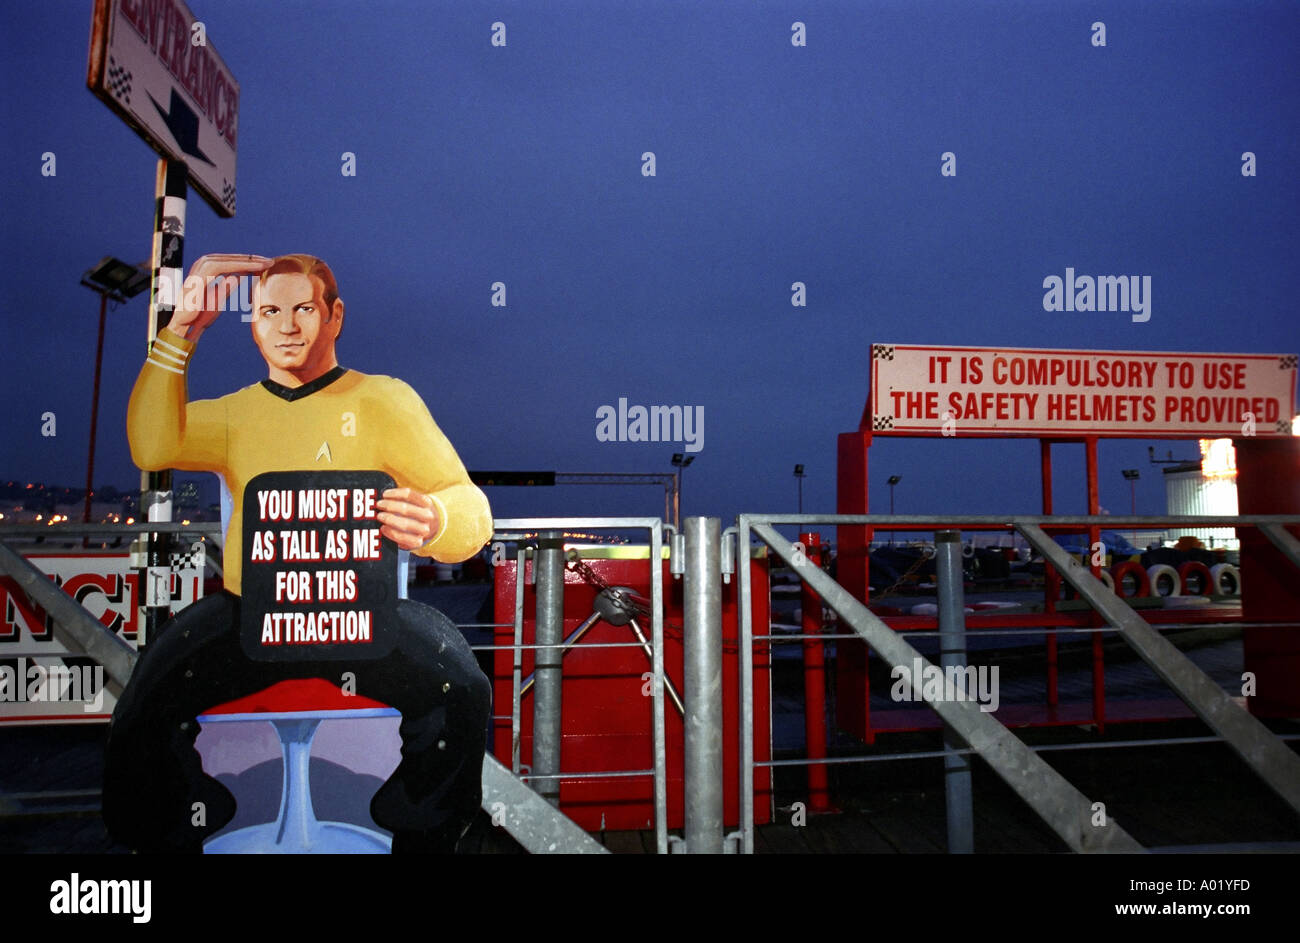 You must be as tall as me to use this attraction Captain James T Kirk fairground sign Stock Photo